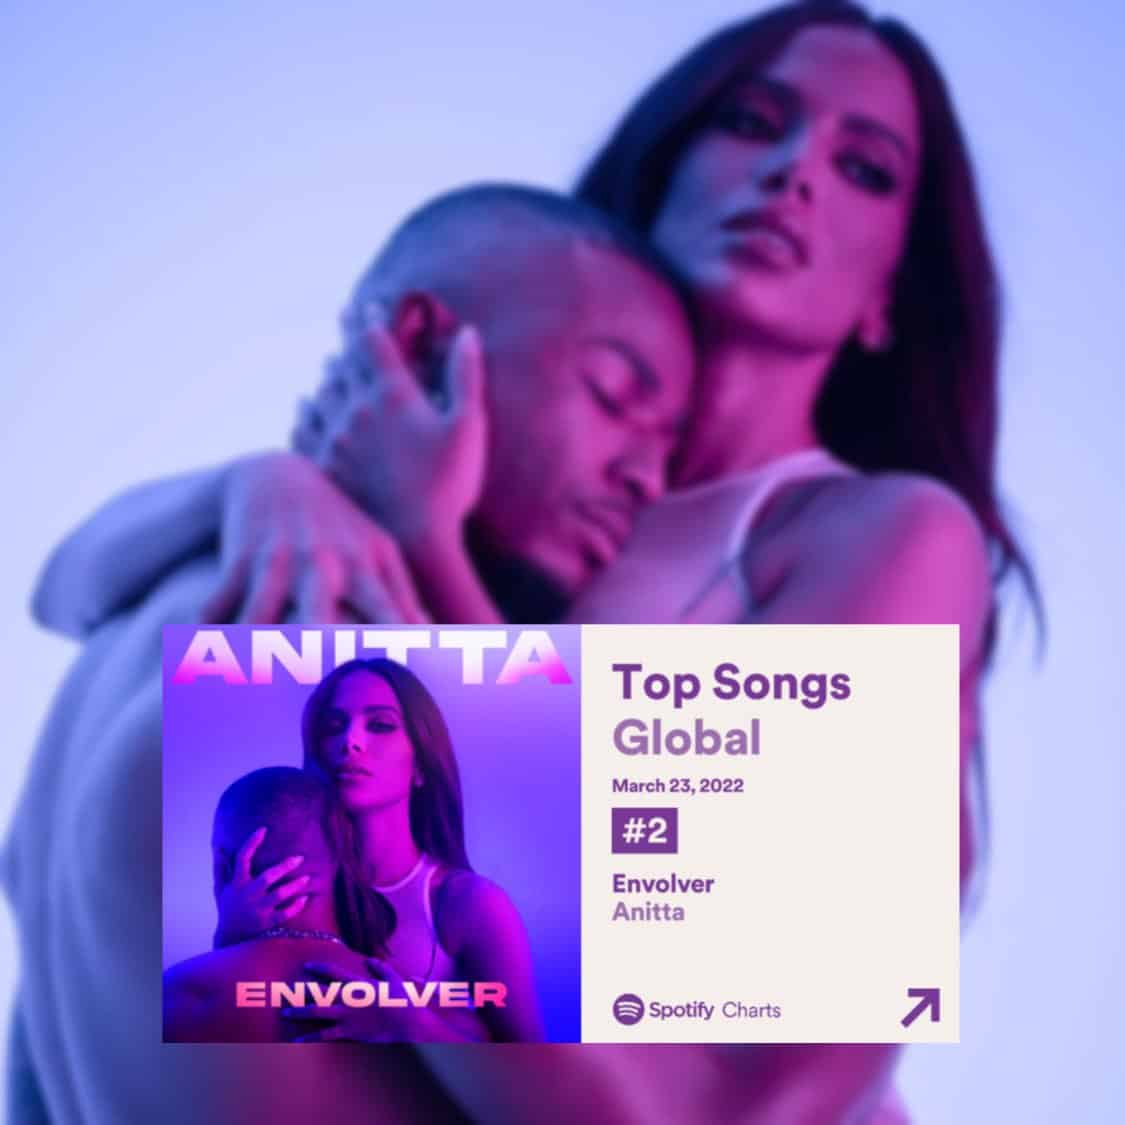 "To involve"by Anitta, reaches 2nd place on Spotify Global